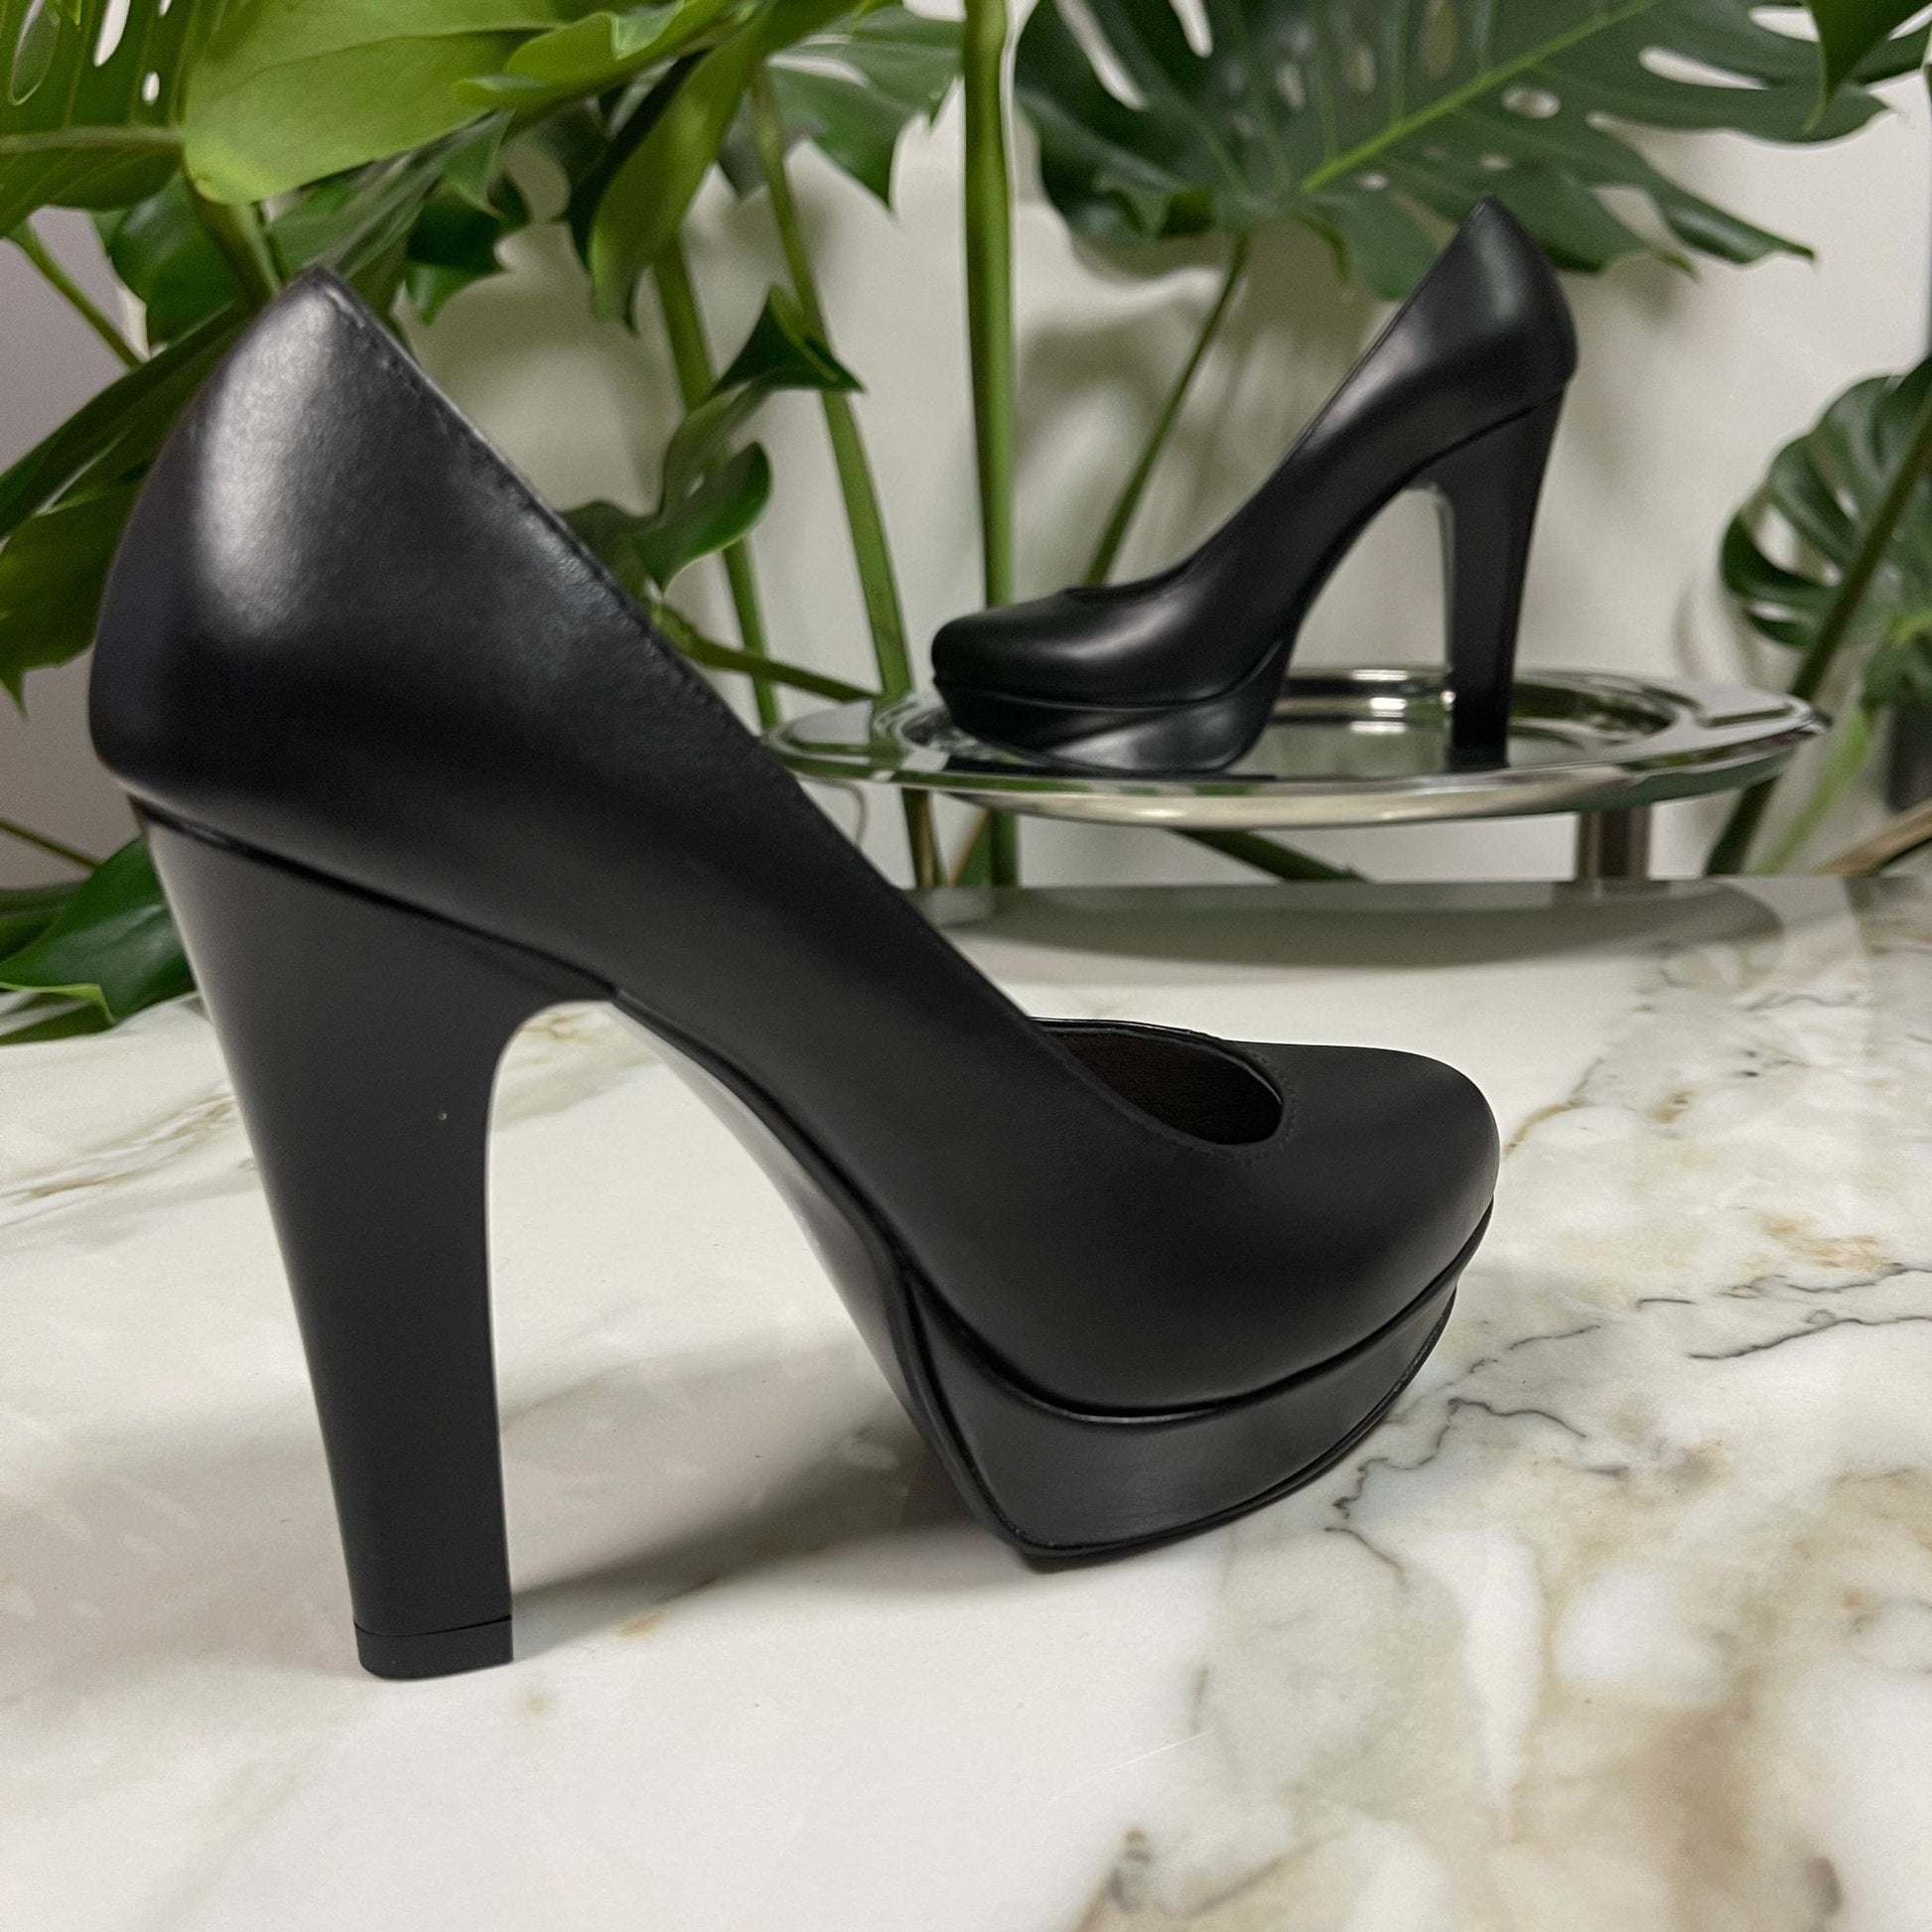 Small size platform court heels in black leather